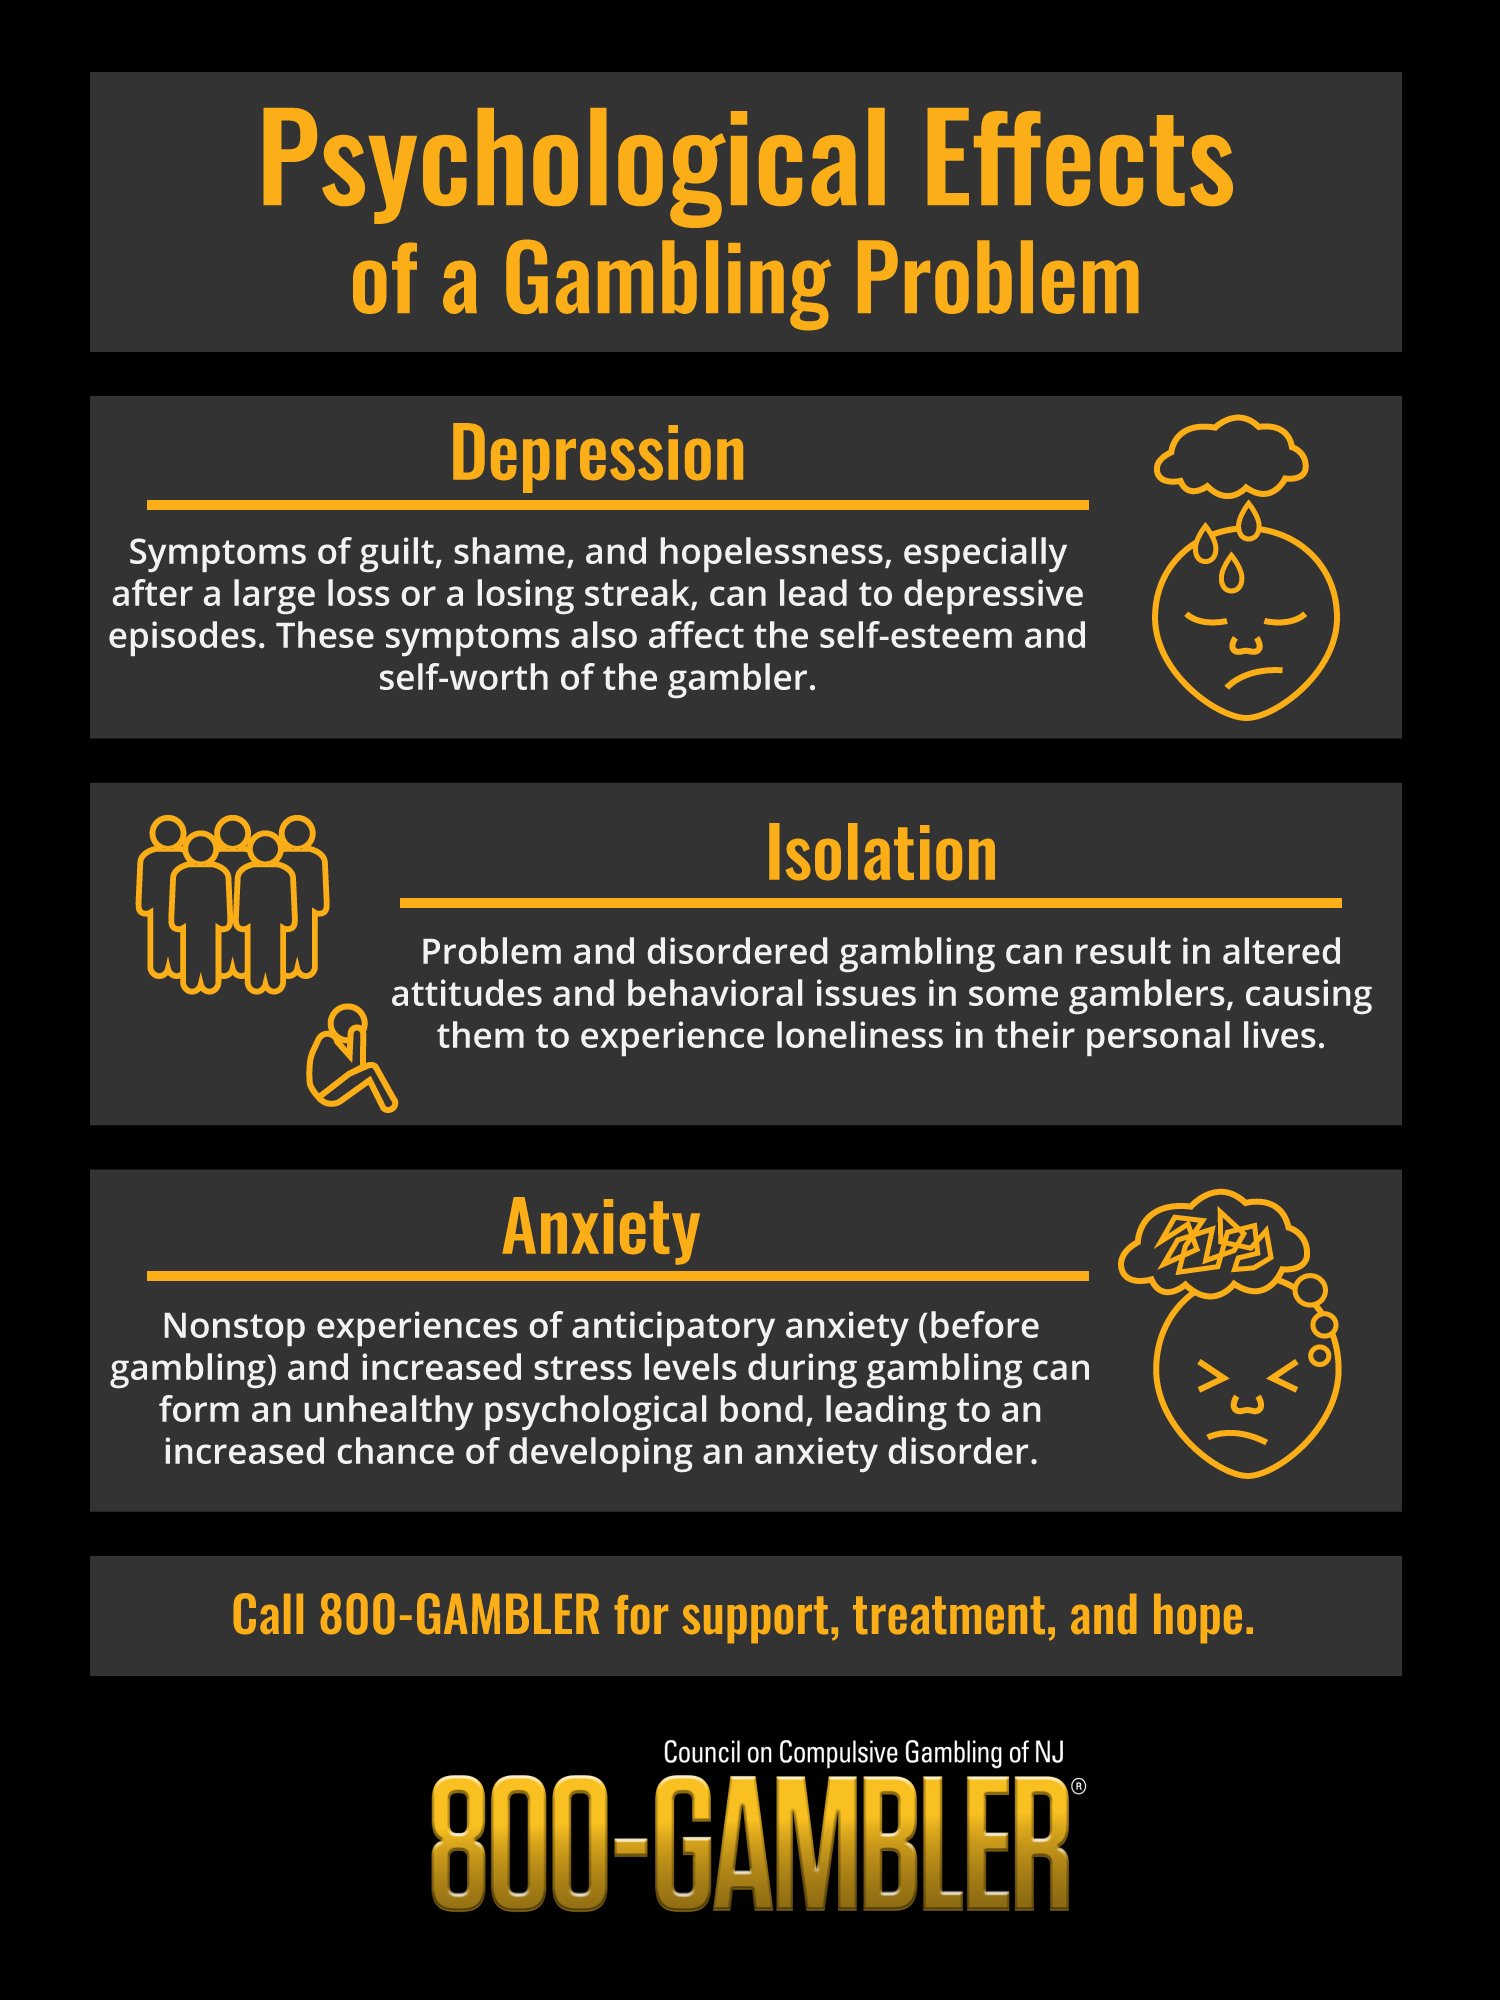 What are the consequences of not gambling responsibly?